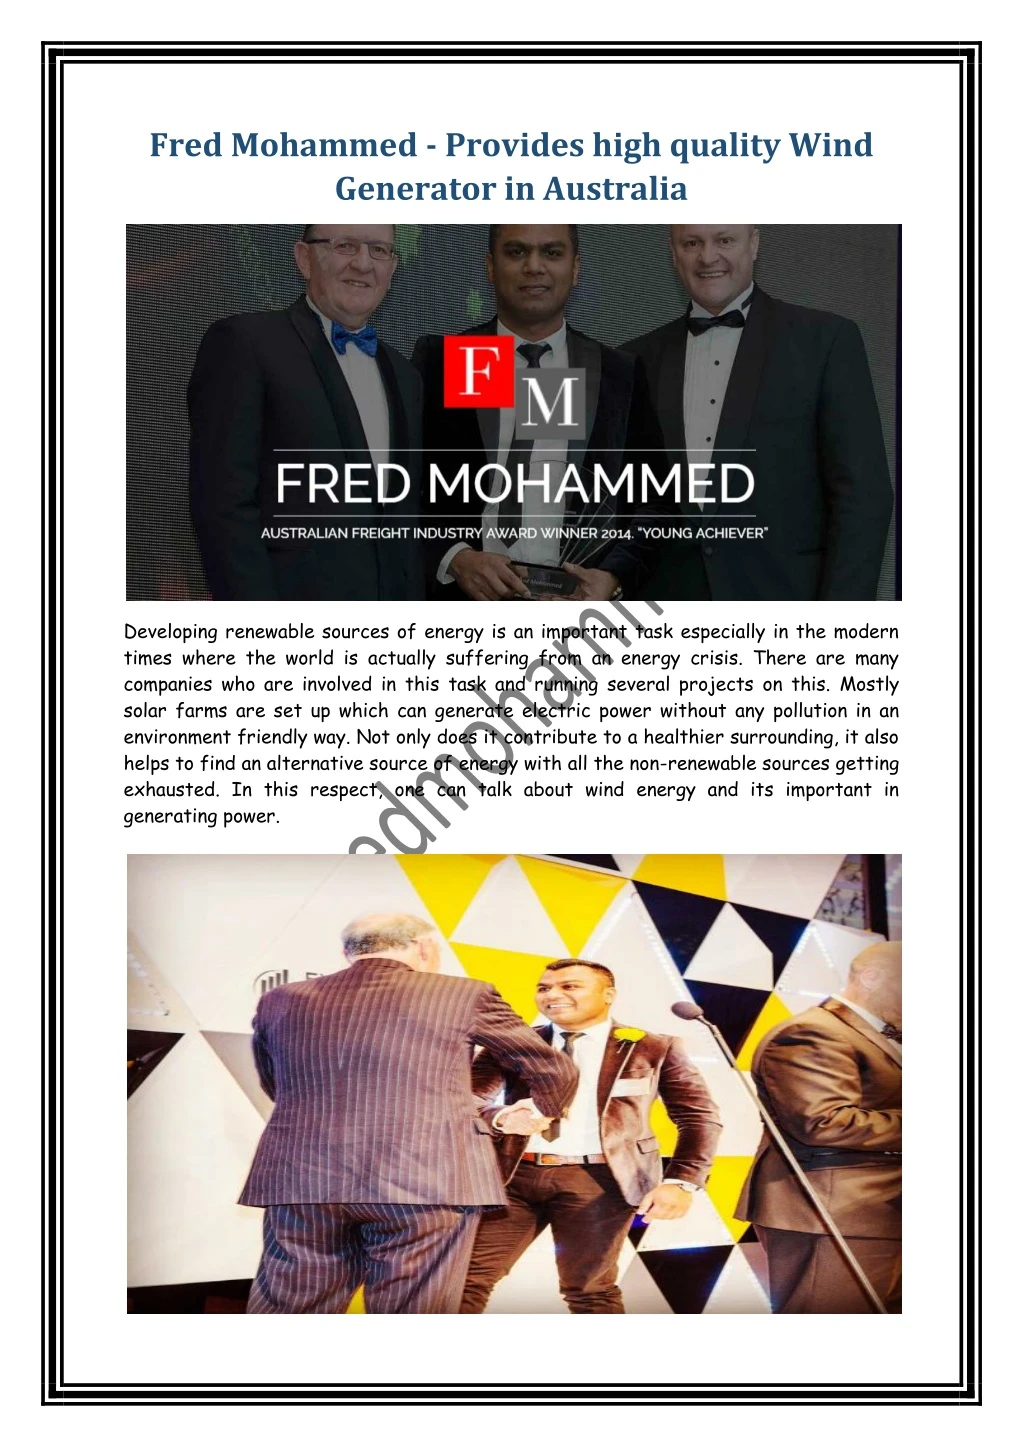 fred mohammed provides high quality wind